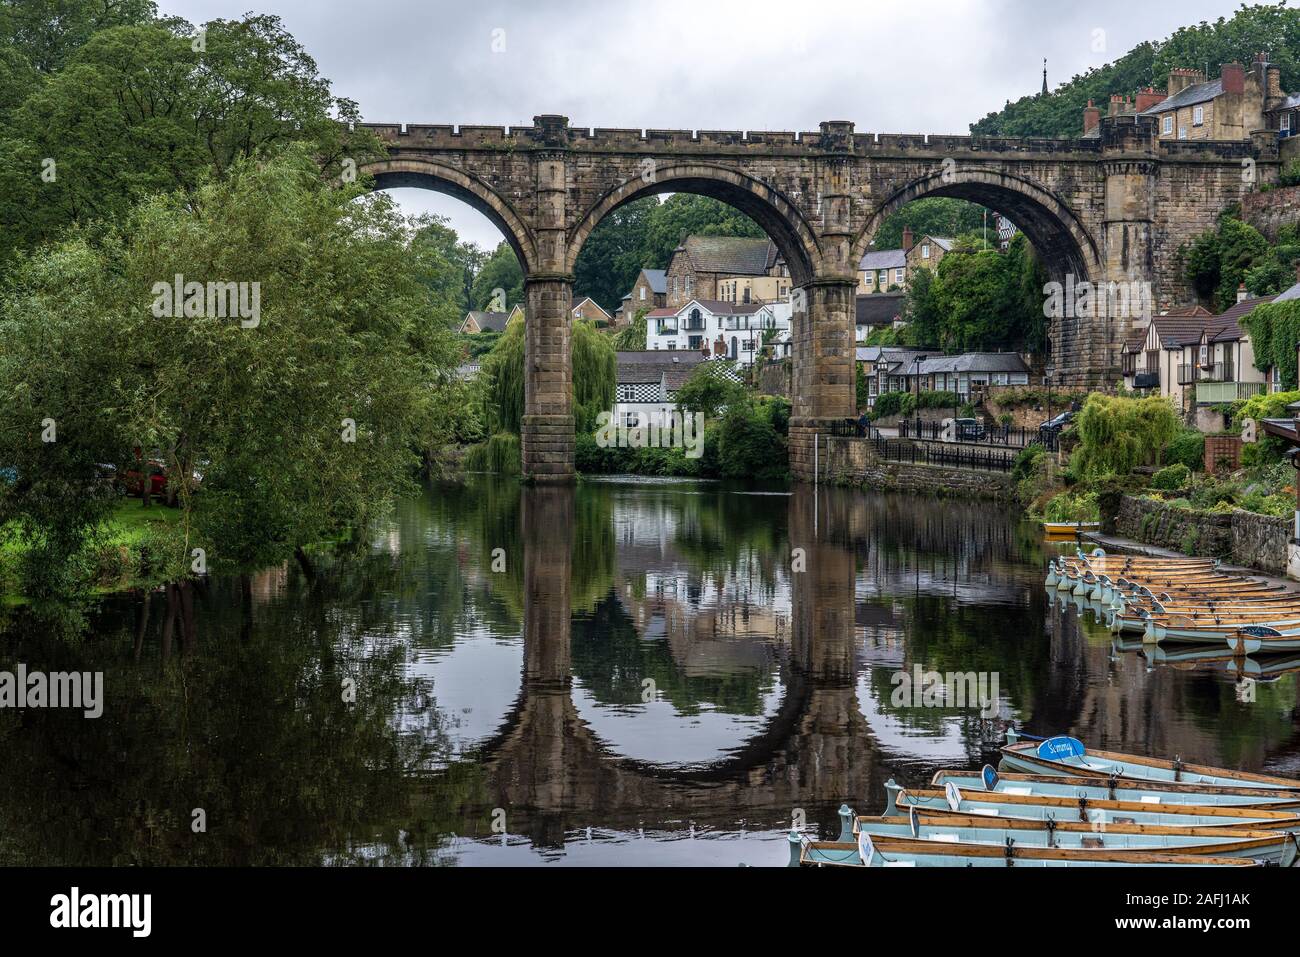 KNARESBOROUGH, UNITED KINGDOM - AUGUST 14: This is a view of Knaresborough, an old riverside town in the Borough of Harrogate on August 14, 2019 in Kn Stock Photo